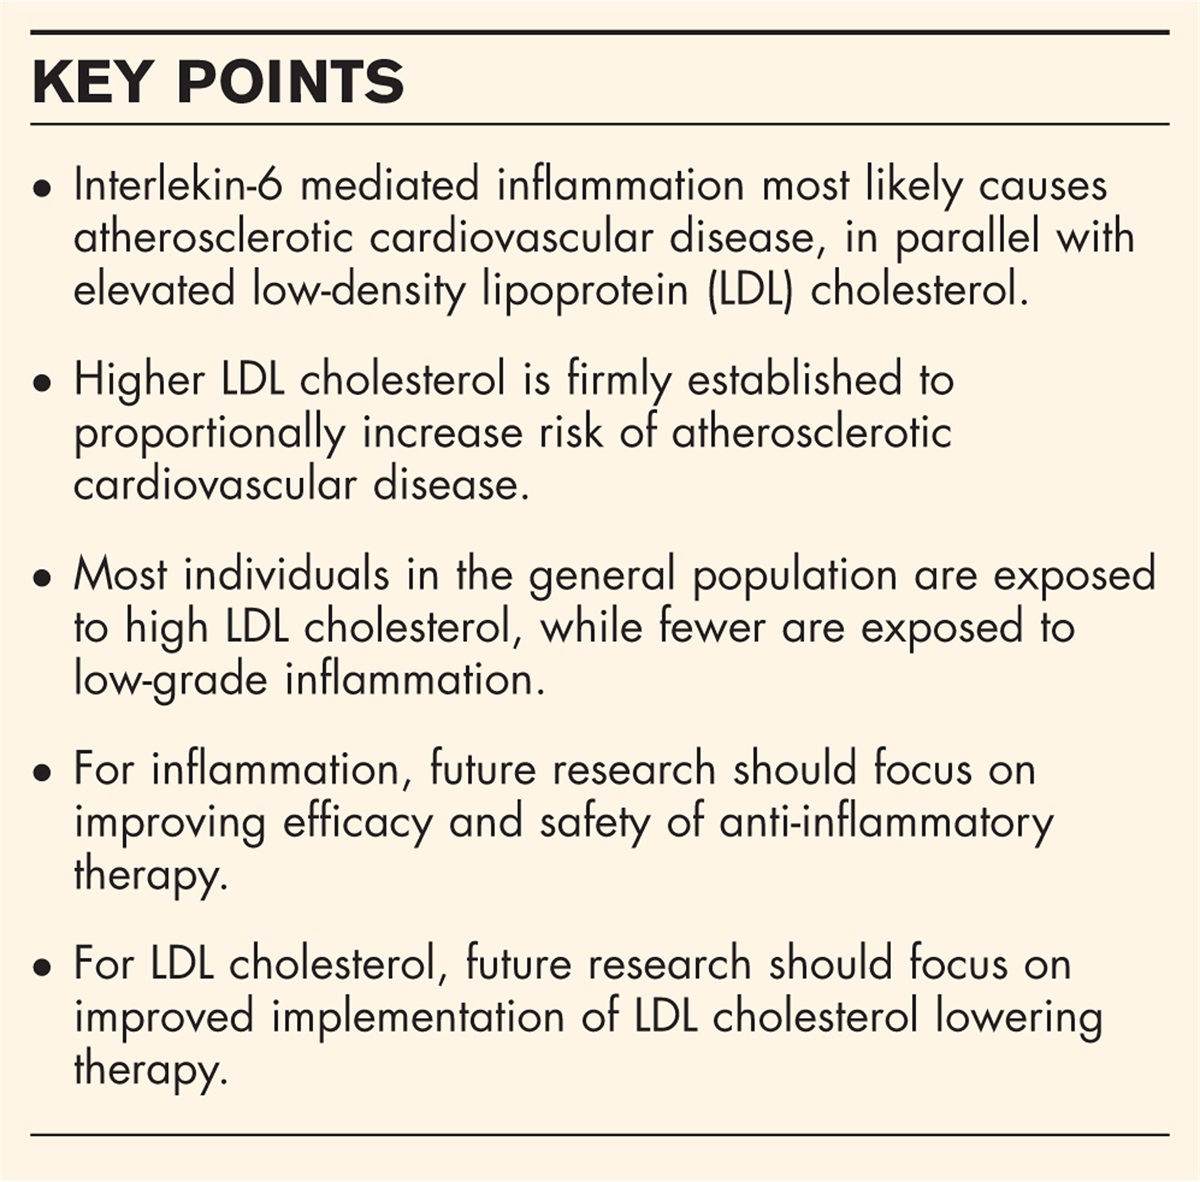 Inflammation compared to low-density lipoprotein cholesterol: two different causes of atherosclerotic cardiovascular disease